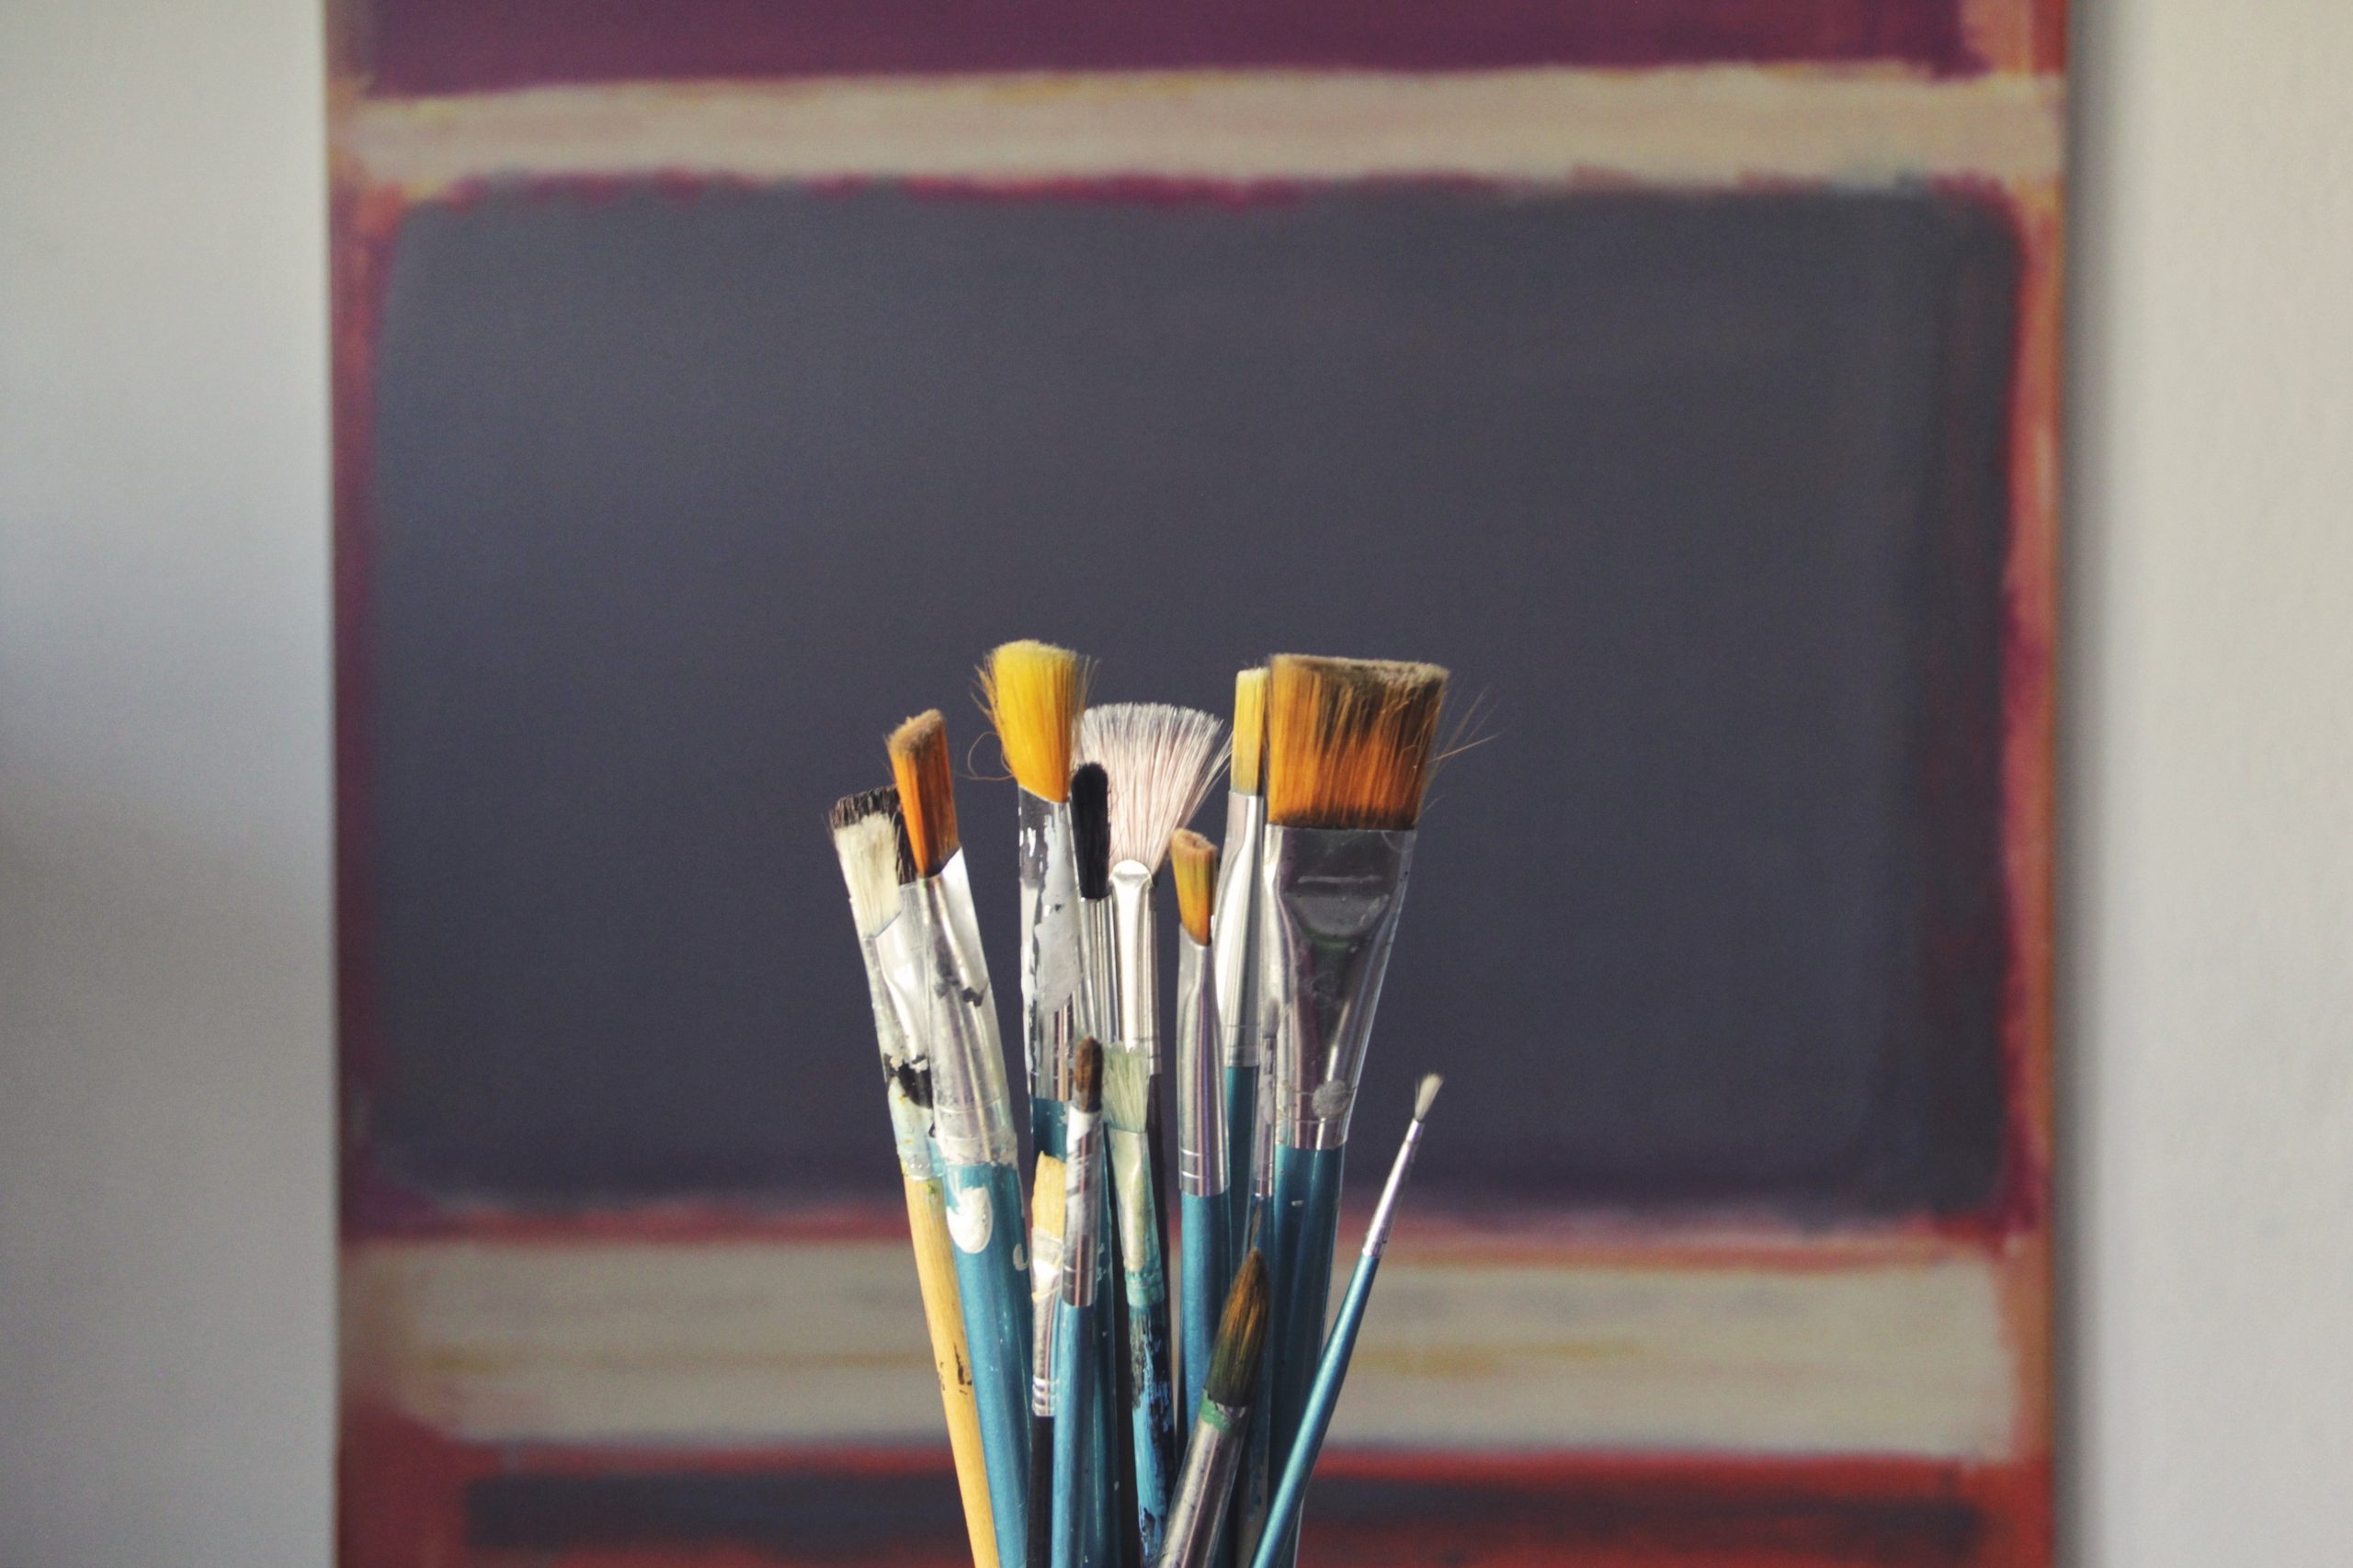 a collection of artistic paintbrushes stood upright in a pot